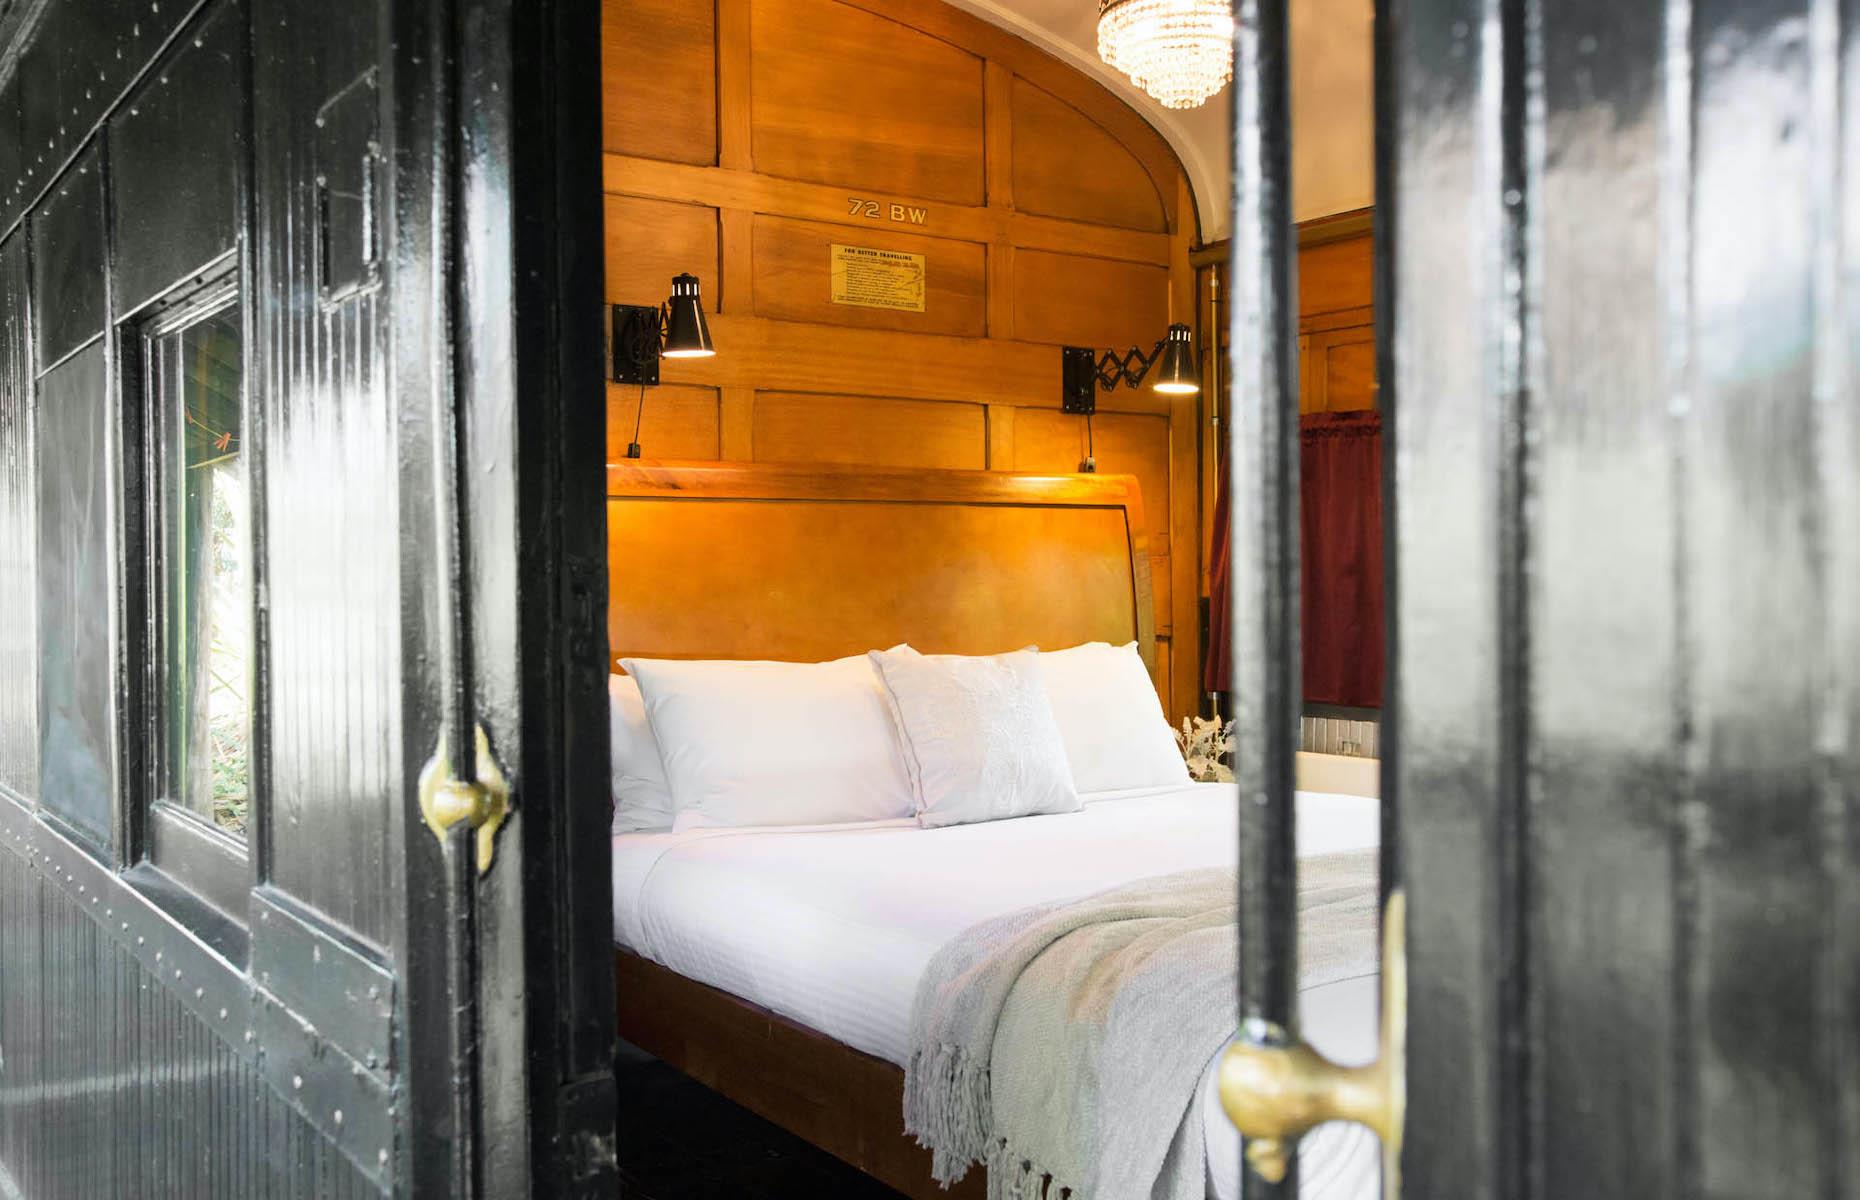 <p>Guests take a trip back to the glamor age of rail travel with a stay on board <a href="https://www.airbnb.com.au/rooms/7294998">this lovingly restored 19th-century steam train</a>, available to hire on Airbnb. Set in the pretty little town of Forrest in the heart of the Otway Ranges (famed for its weatherboard shacks and excellent mountain biking trails), the train makes for a romantic retreat. The master carriage has a queen bed and there are two other beds as well as a bathroom, outdoor bathtub, small kitchen and open-plan lounge with wood-fired stove.</p>